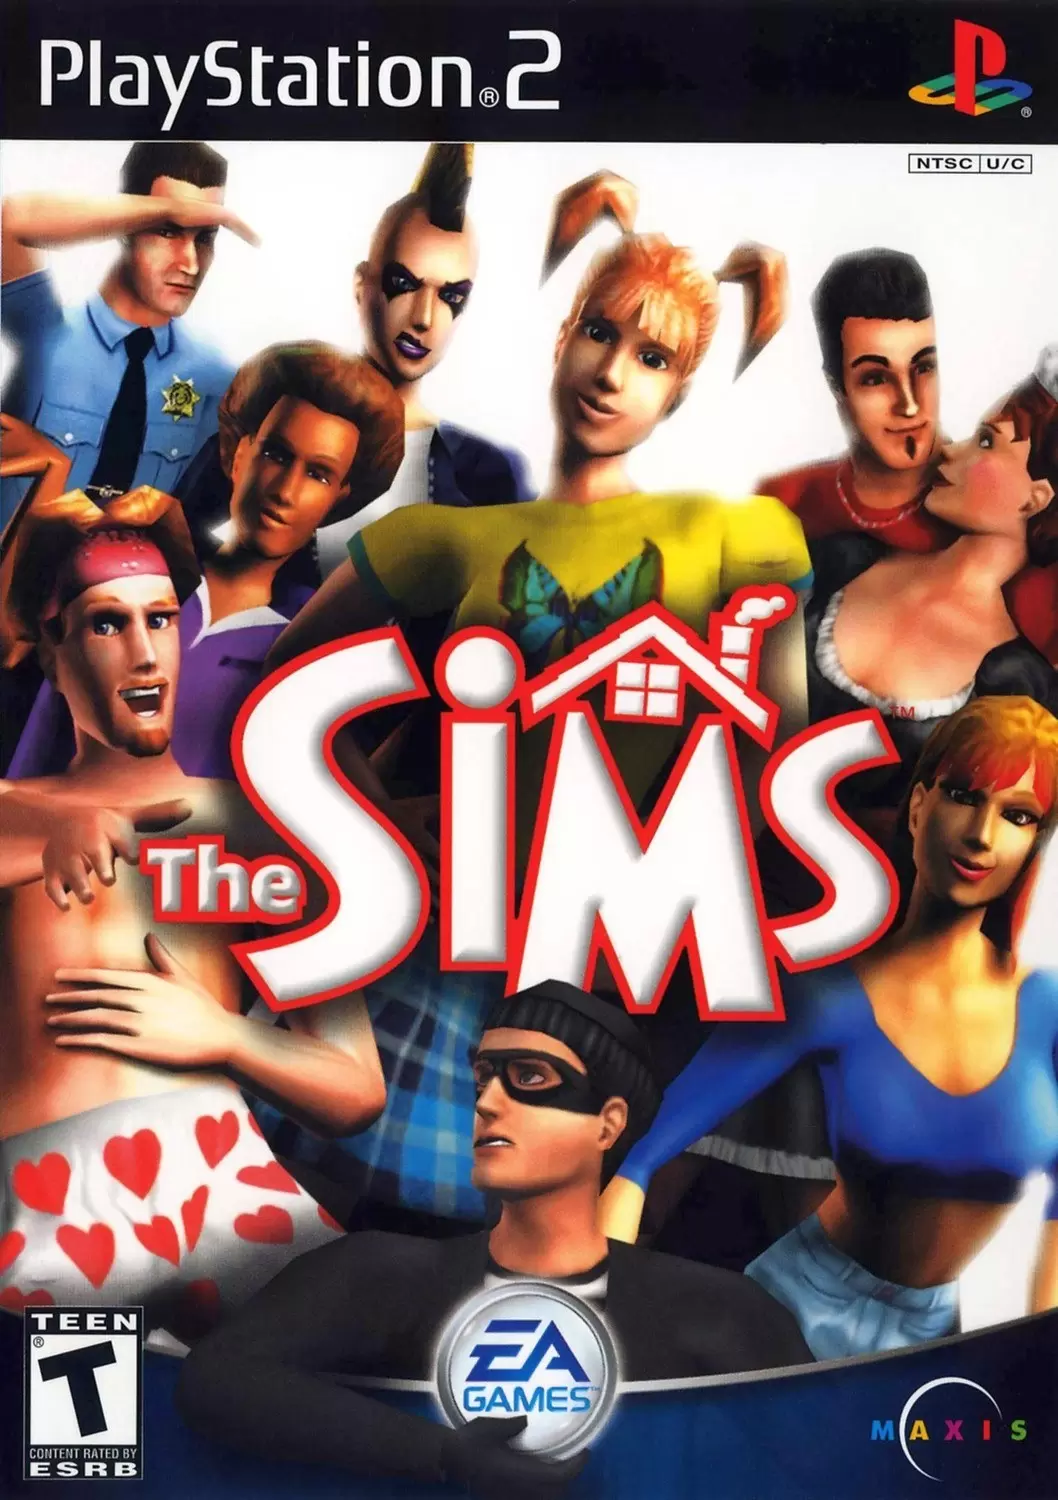 PS2 Games - The Sims